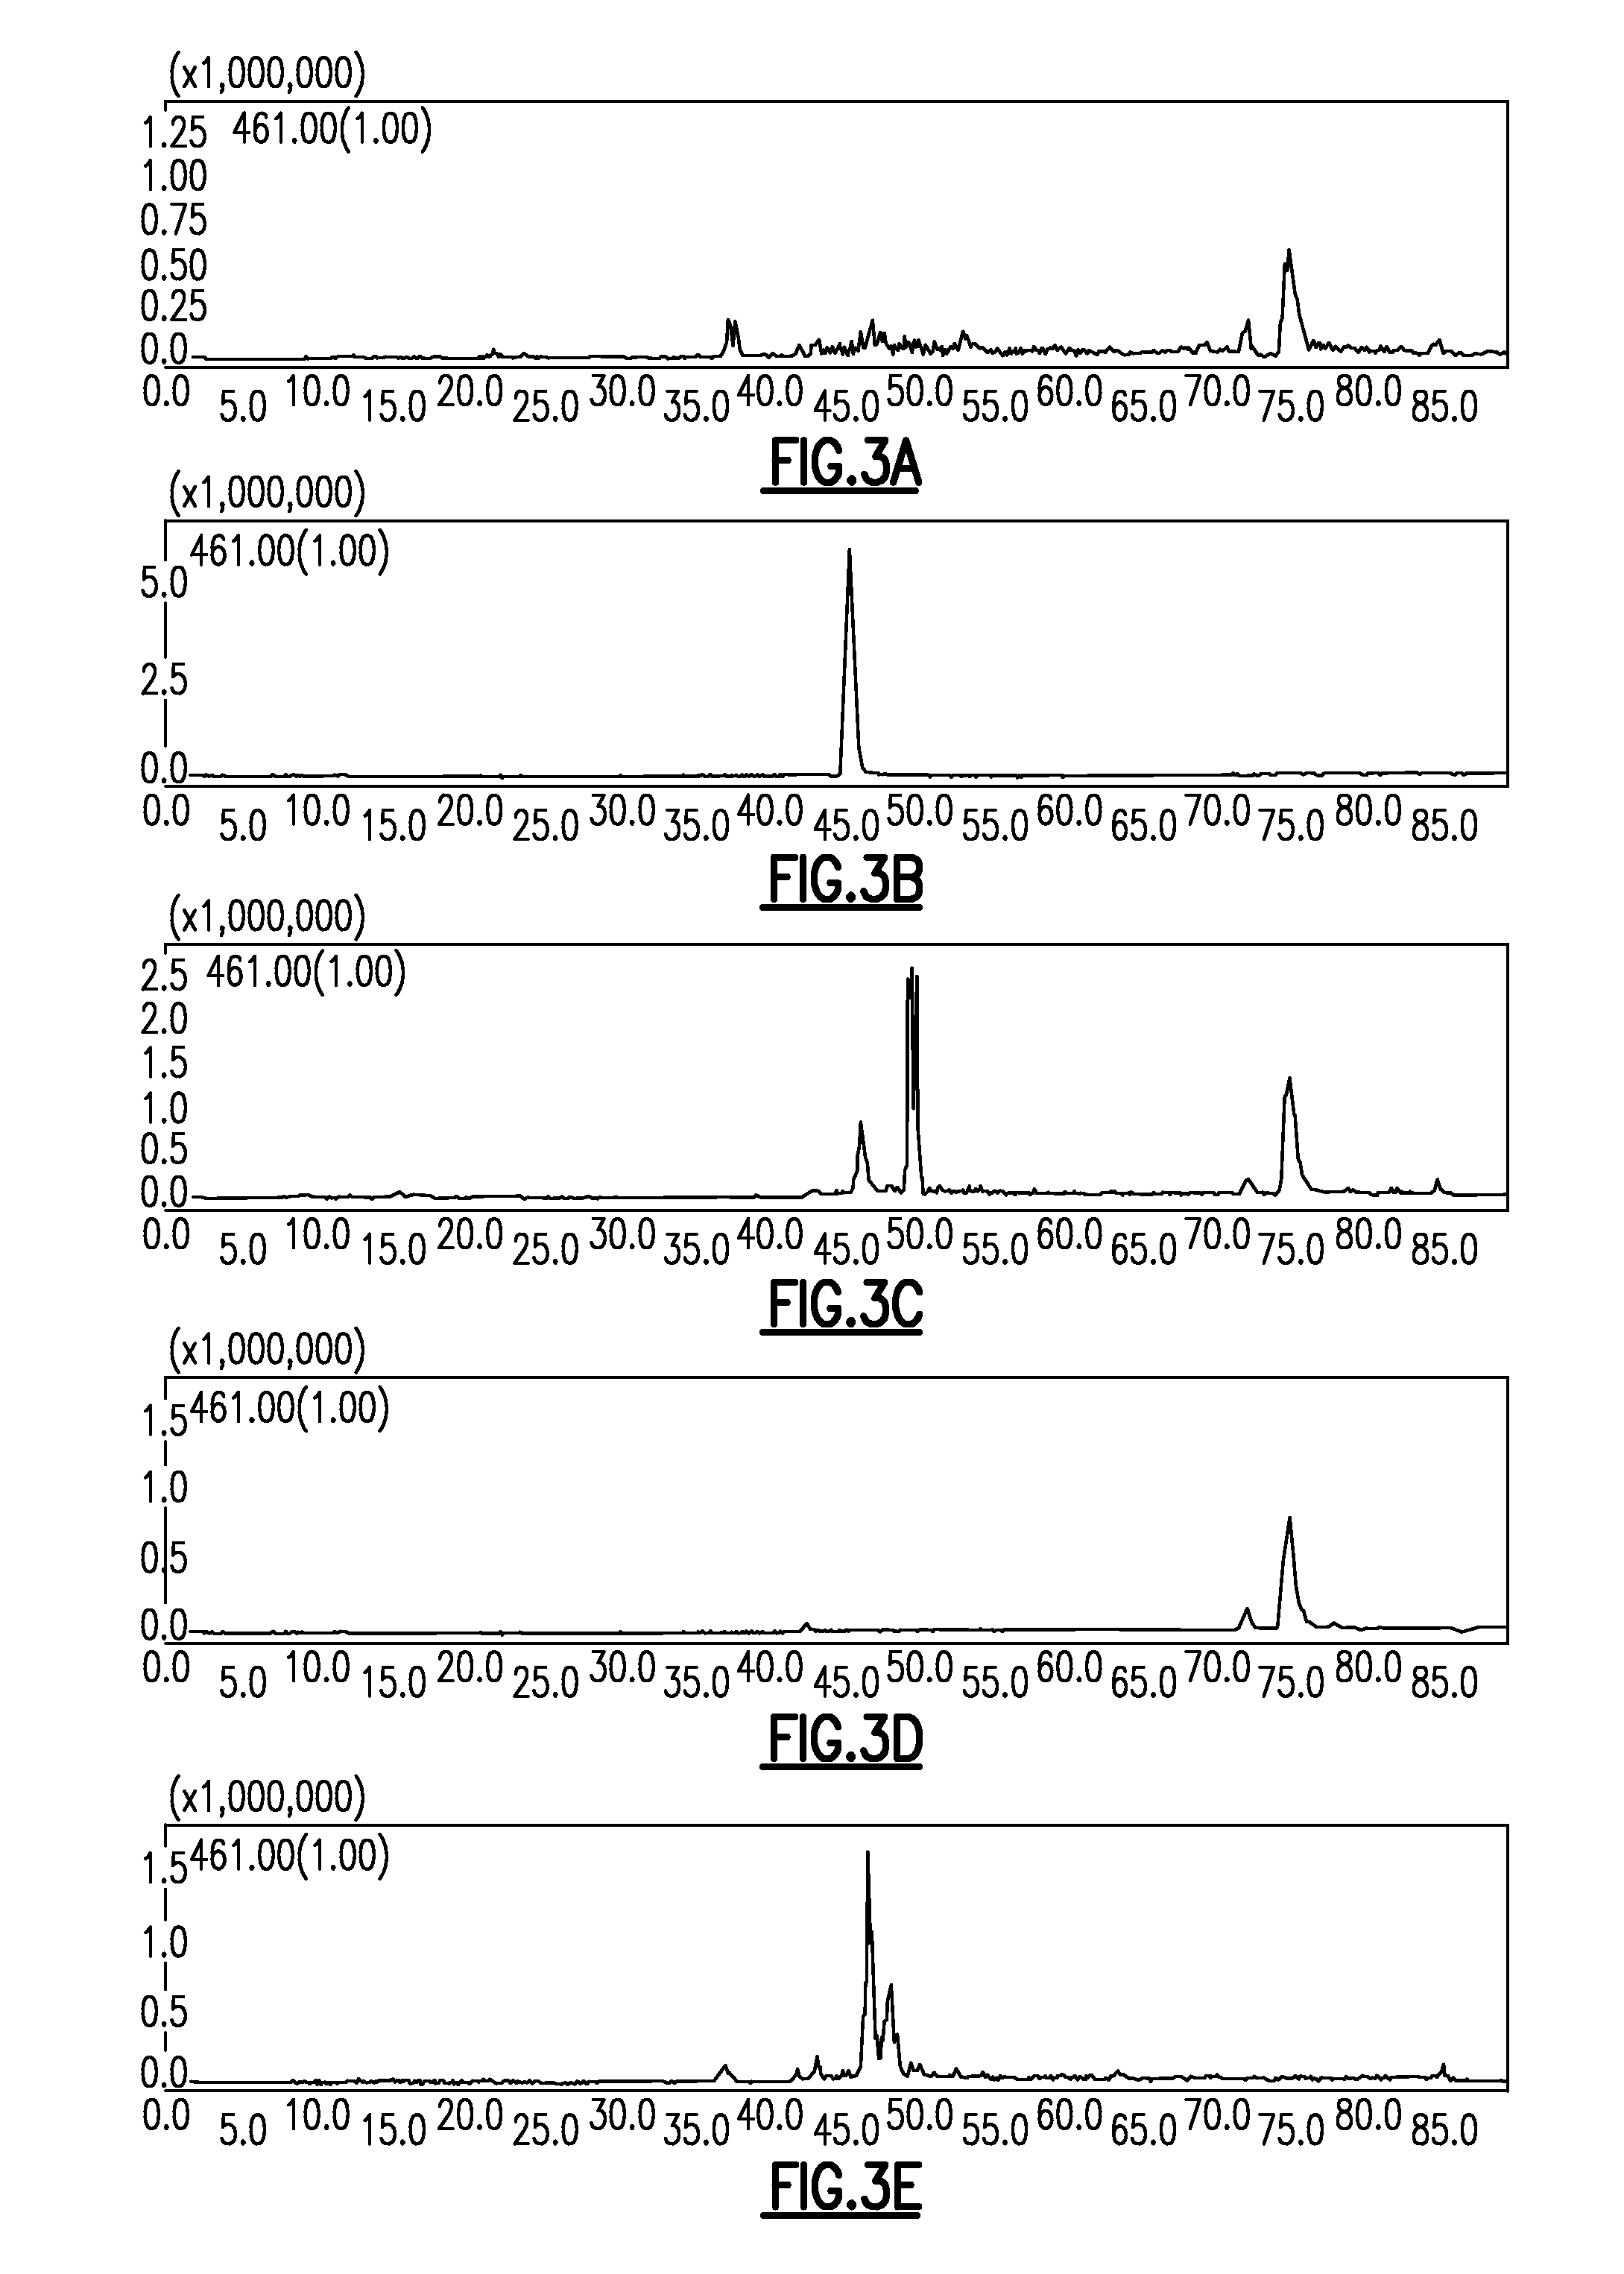 System and Method For the Heterologous Expression of Polyketide Synthase Gene Clusters